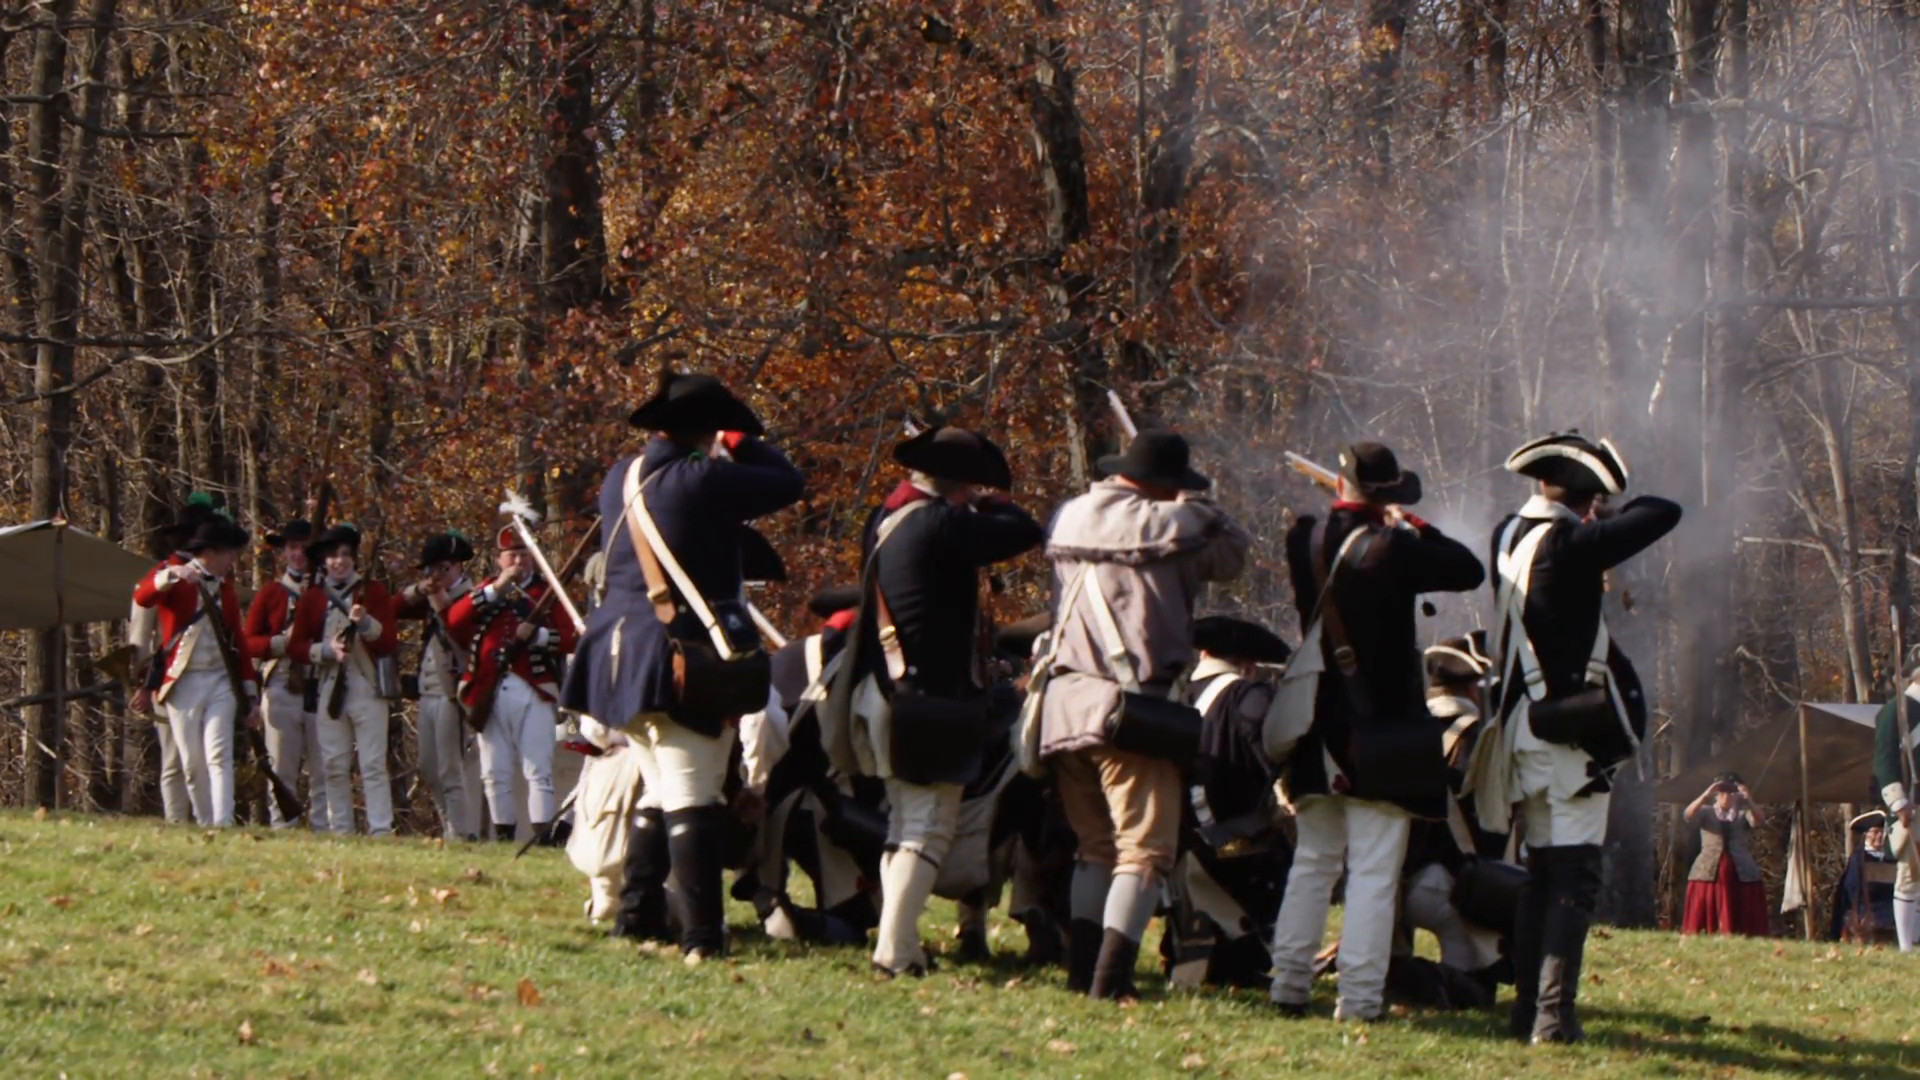 1920x1080 Revolutionary War reenactment. The Continental army and the British  Redcoats fire on one another. Shot on RED EPIC, 1080p HD. DANBURY, CT/USA -  NOVEMBER 2, ...